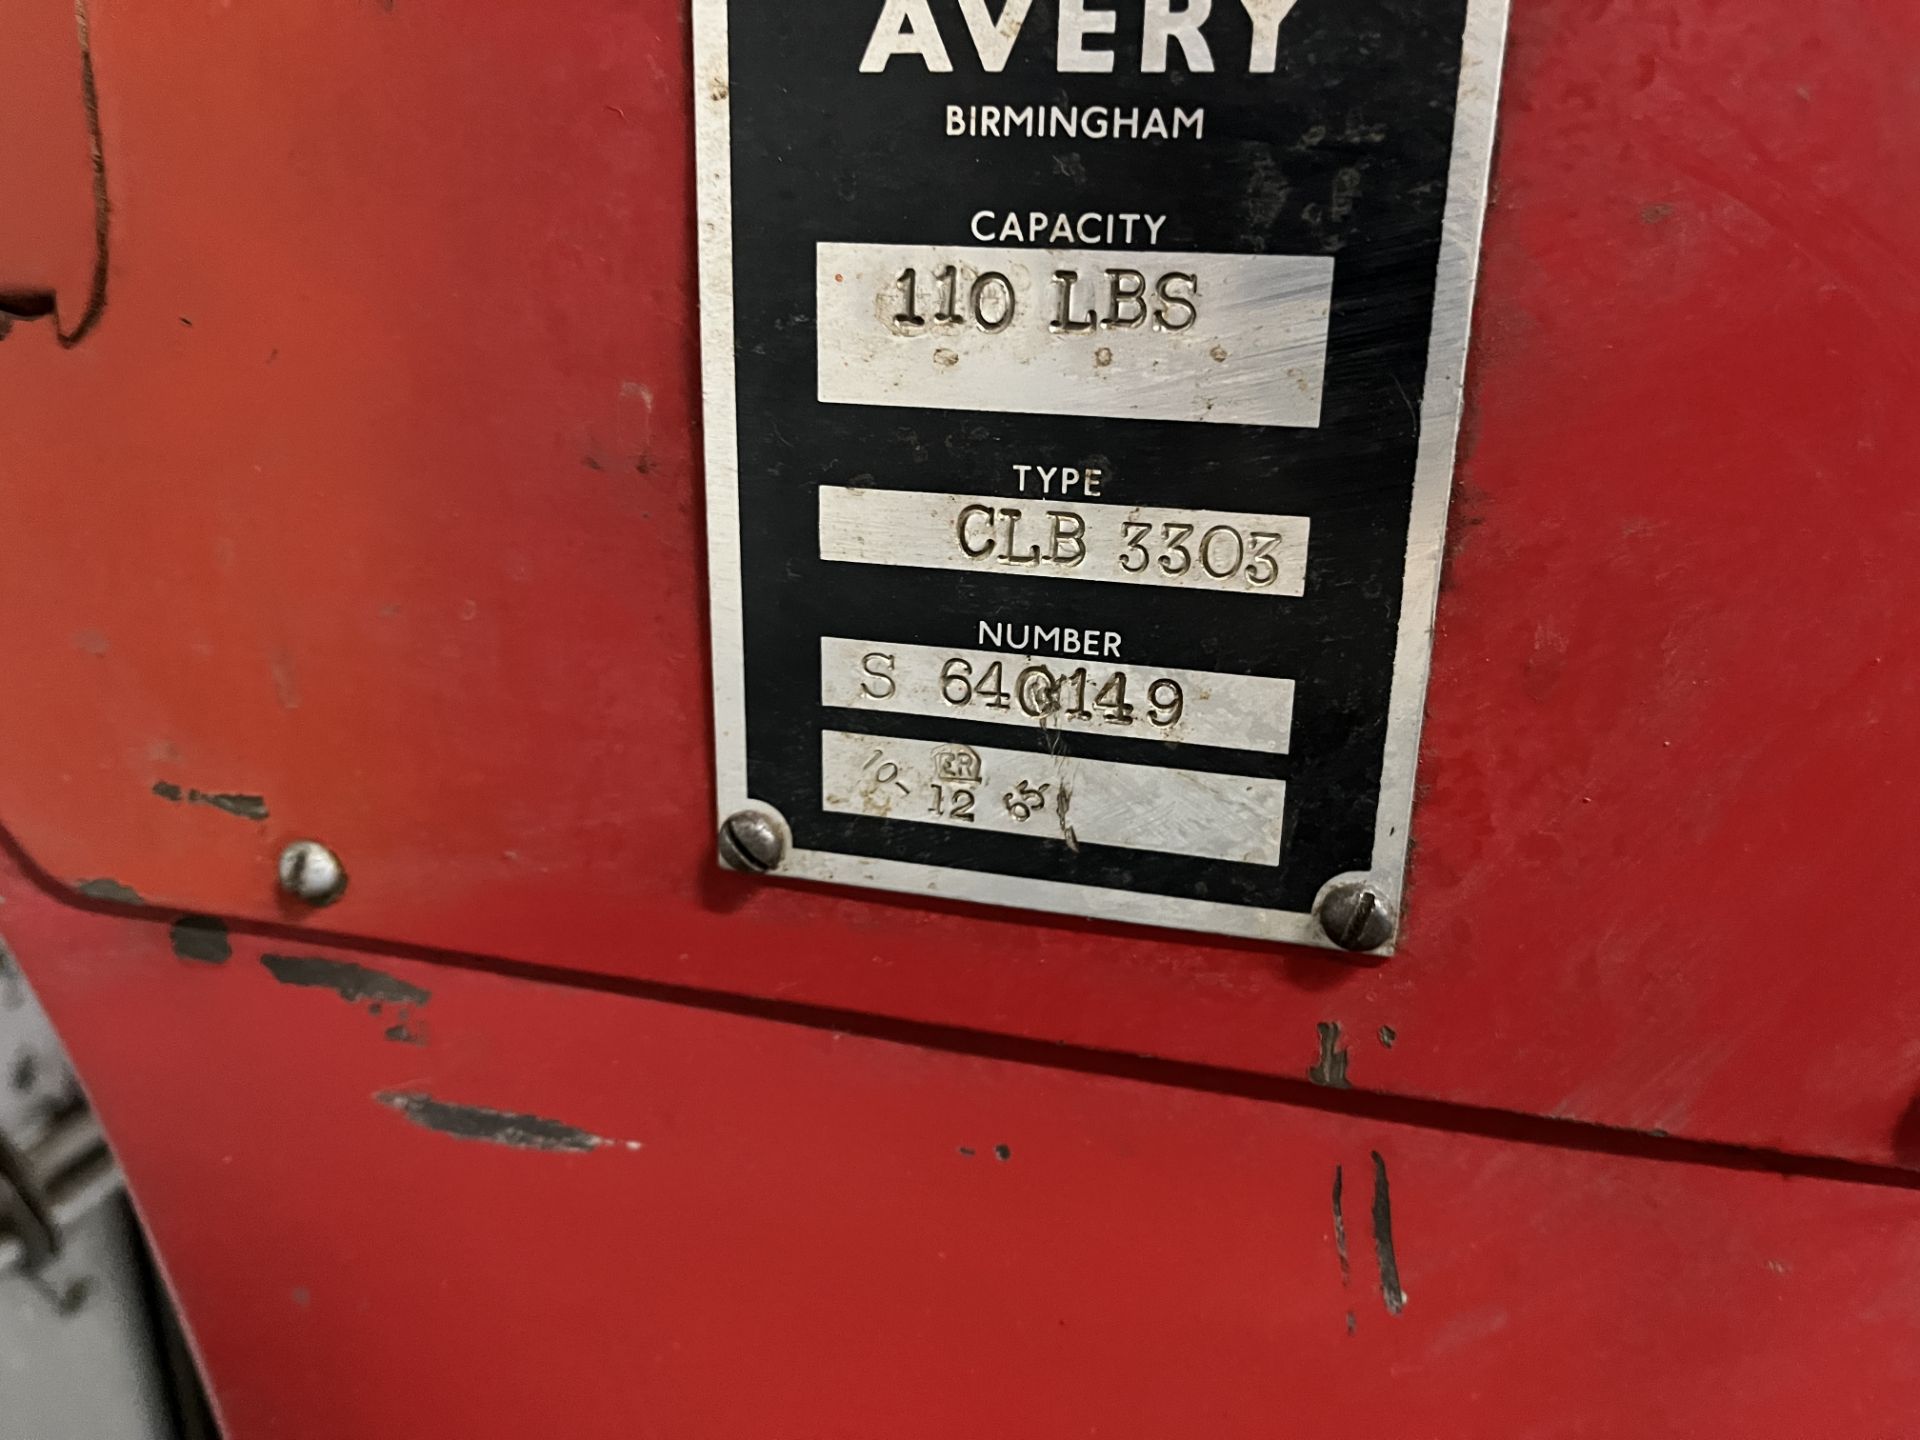 AVERY CLB3305 110LB CAP. WEIGH SCALE W/ TABLE - Image 2 of 2